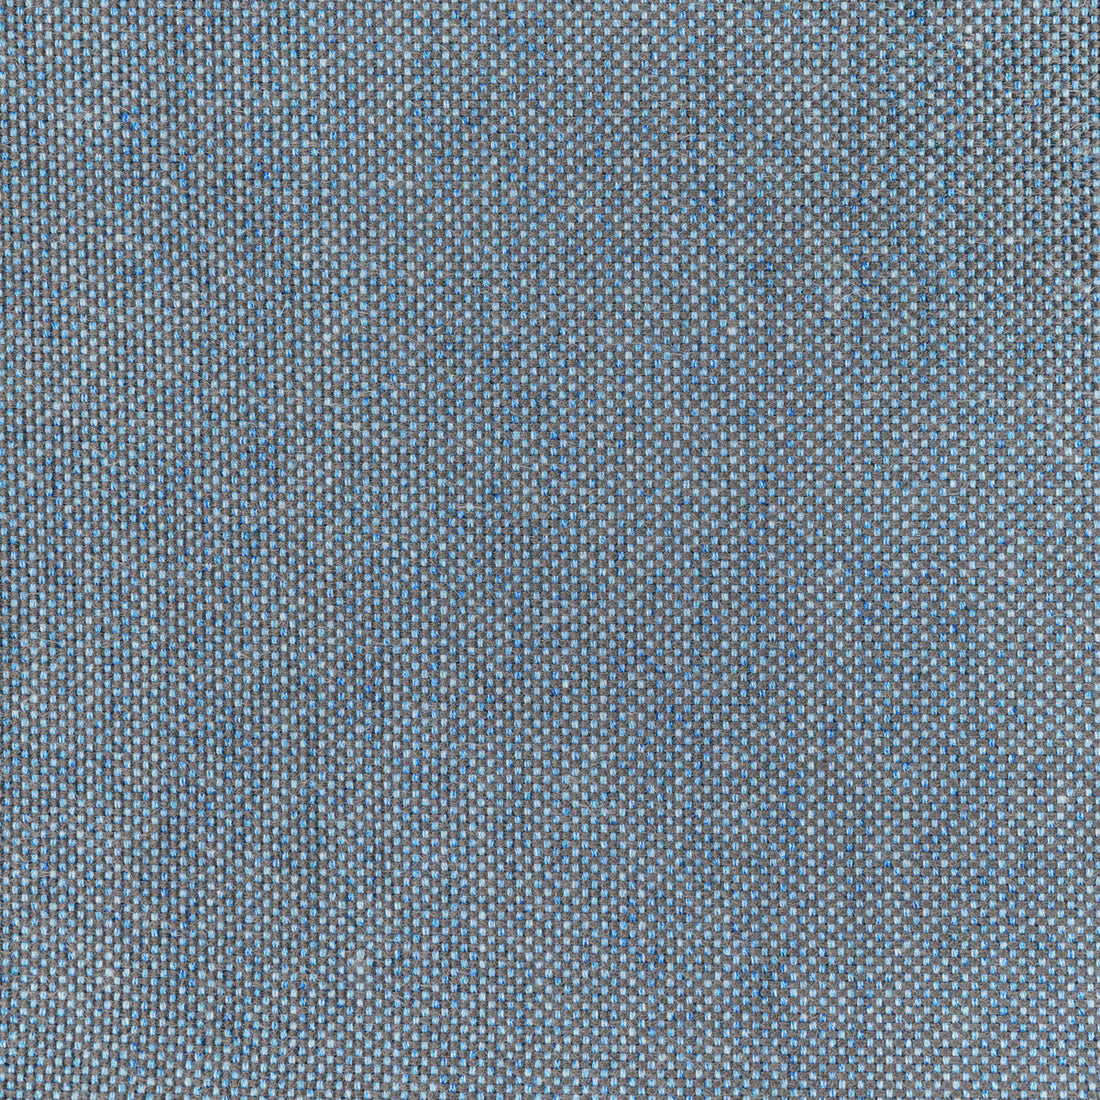 Kravet Basics fabric in 36826-15 color - pattern 36826.15.0 - by Kravet Basics in the Indoor / Outdoor collection